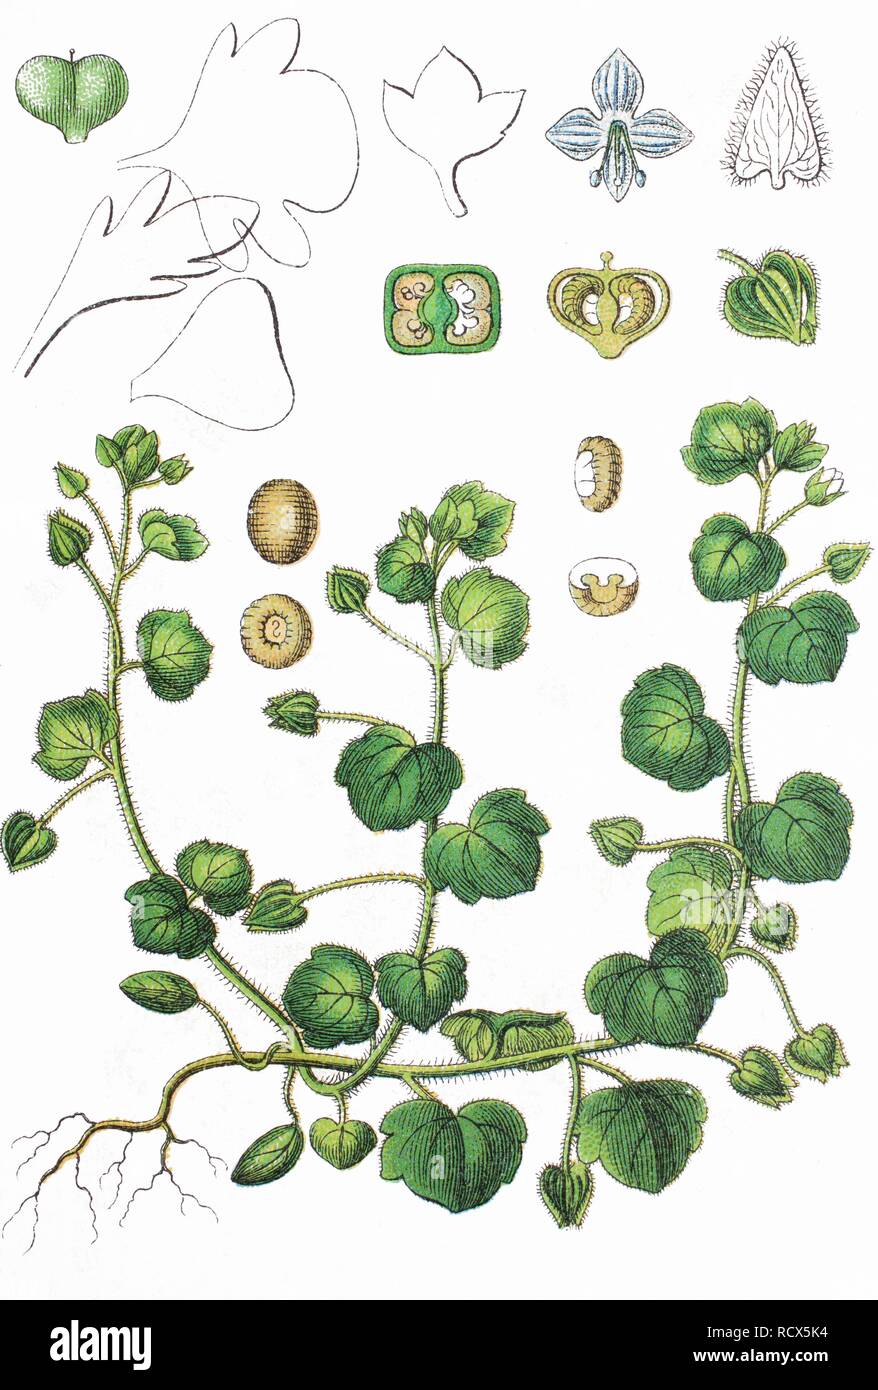 Ivy-leaved speedwell (Veronica hederifolia), chromolithography, 1888 Stock Photo